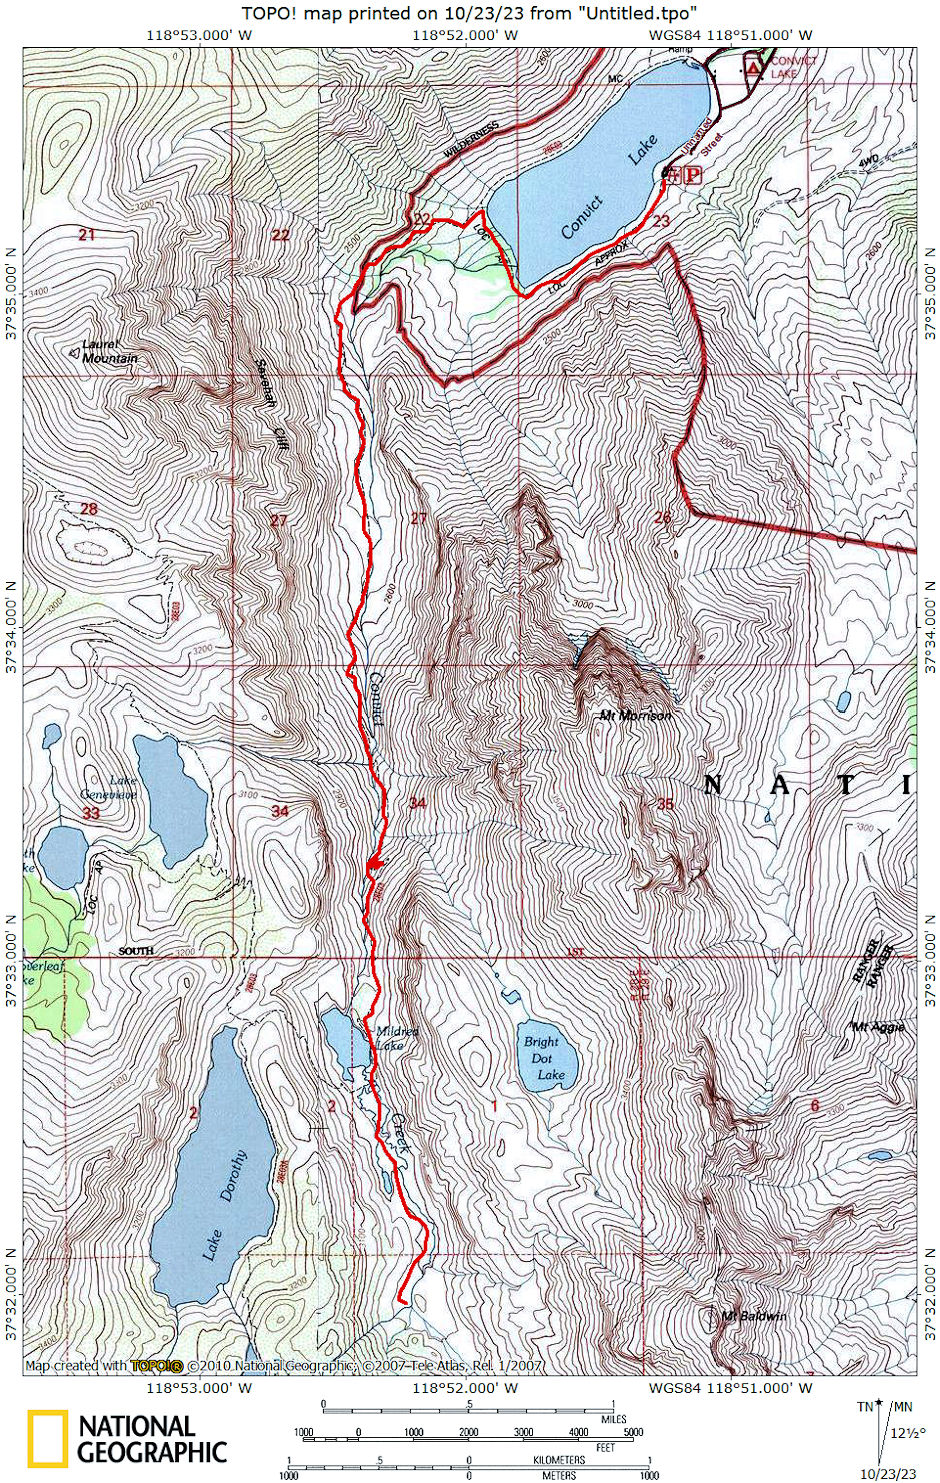 Route for fourth Convict Creek backpack 1977